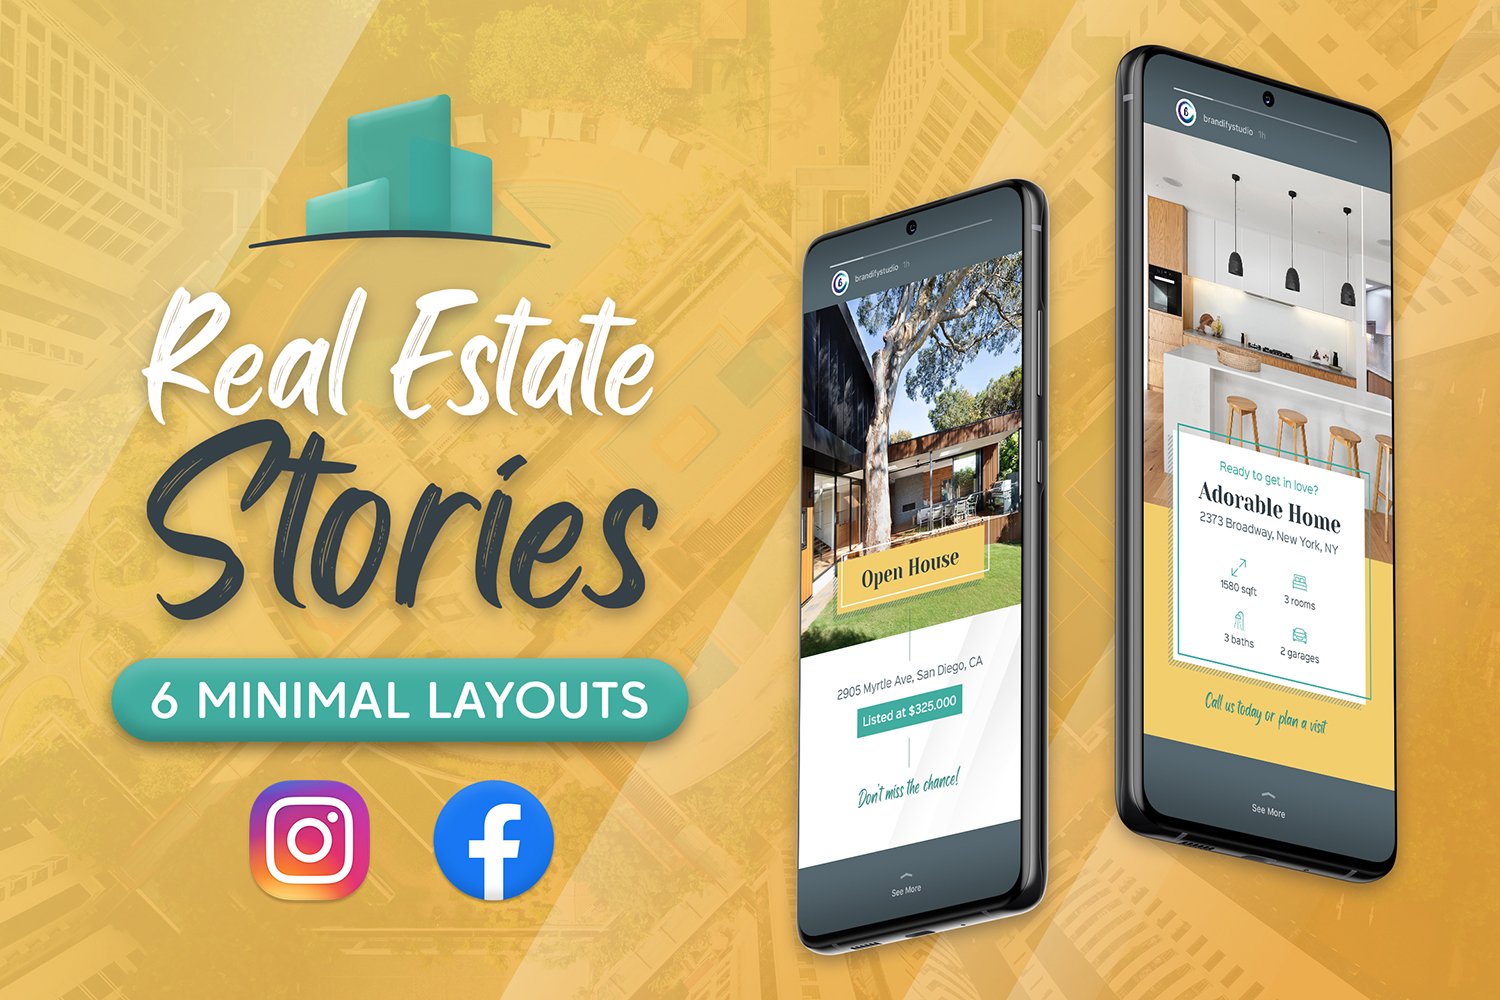 Real Estate Stories for Facebook and Instagram